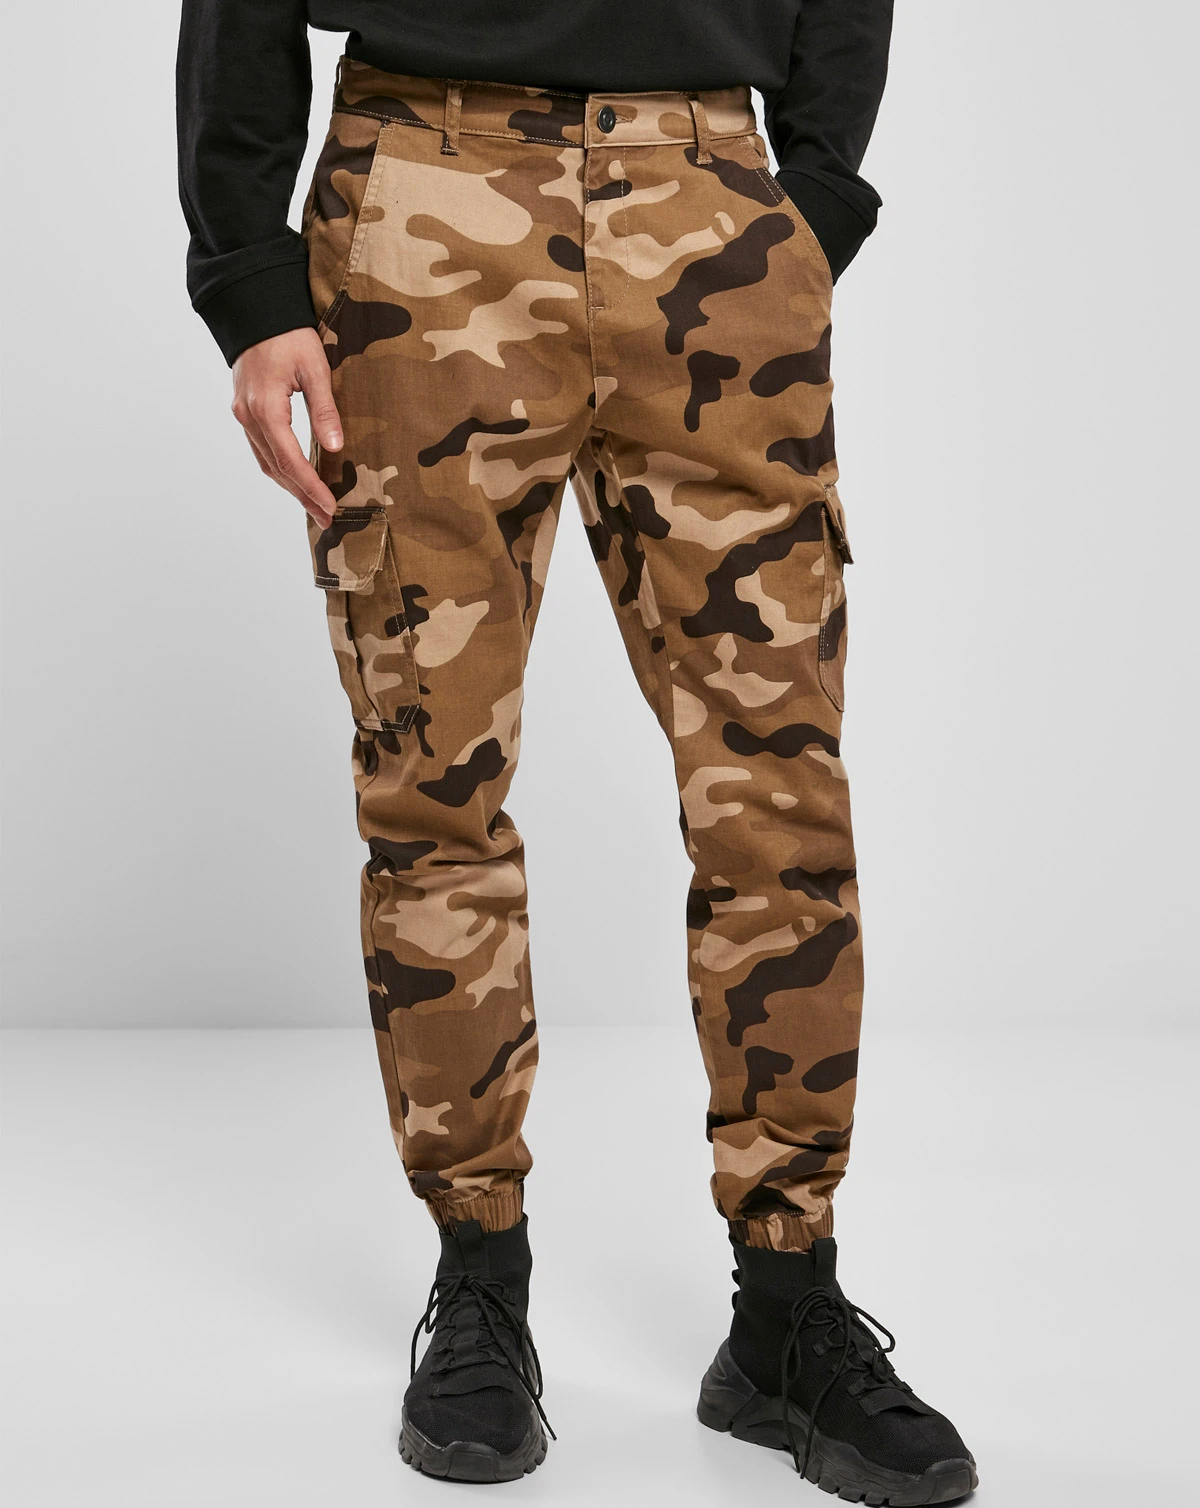 Camouflage Pants for men Army pants Star